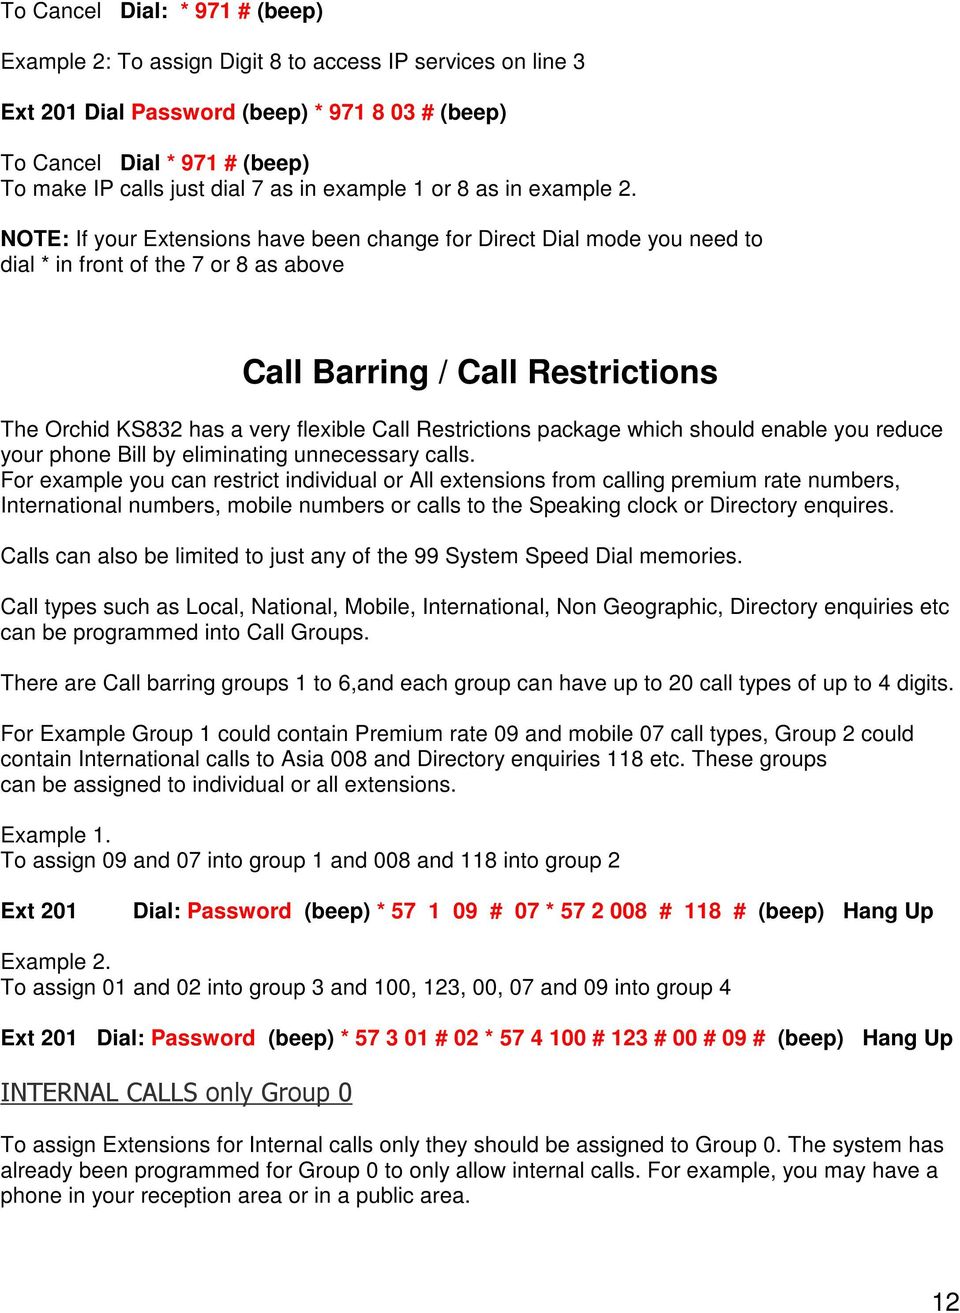 NOTE: If your Extensions have been change for Direct Dial mode you need to dial * in front of the 7 or 8 as above Call Barring / Call Restrictions The Orchid KS832 has a very flexible Call